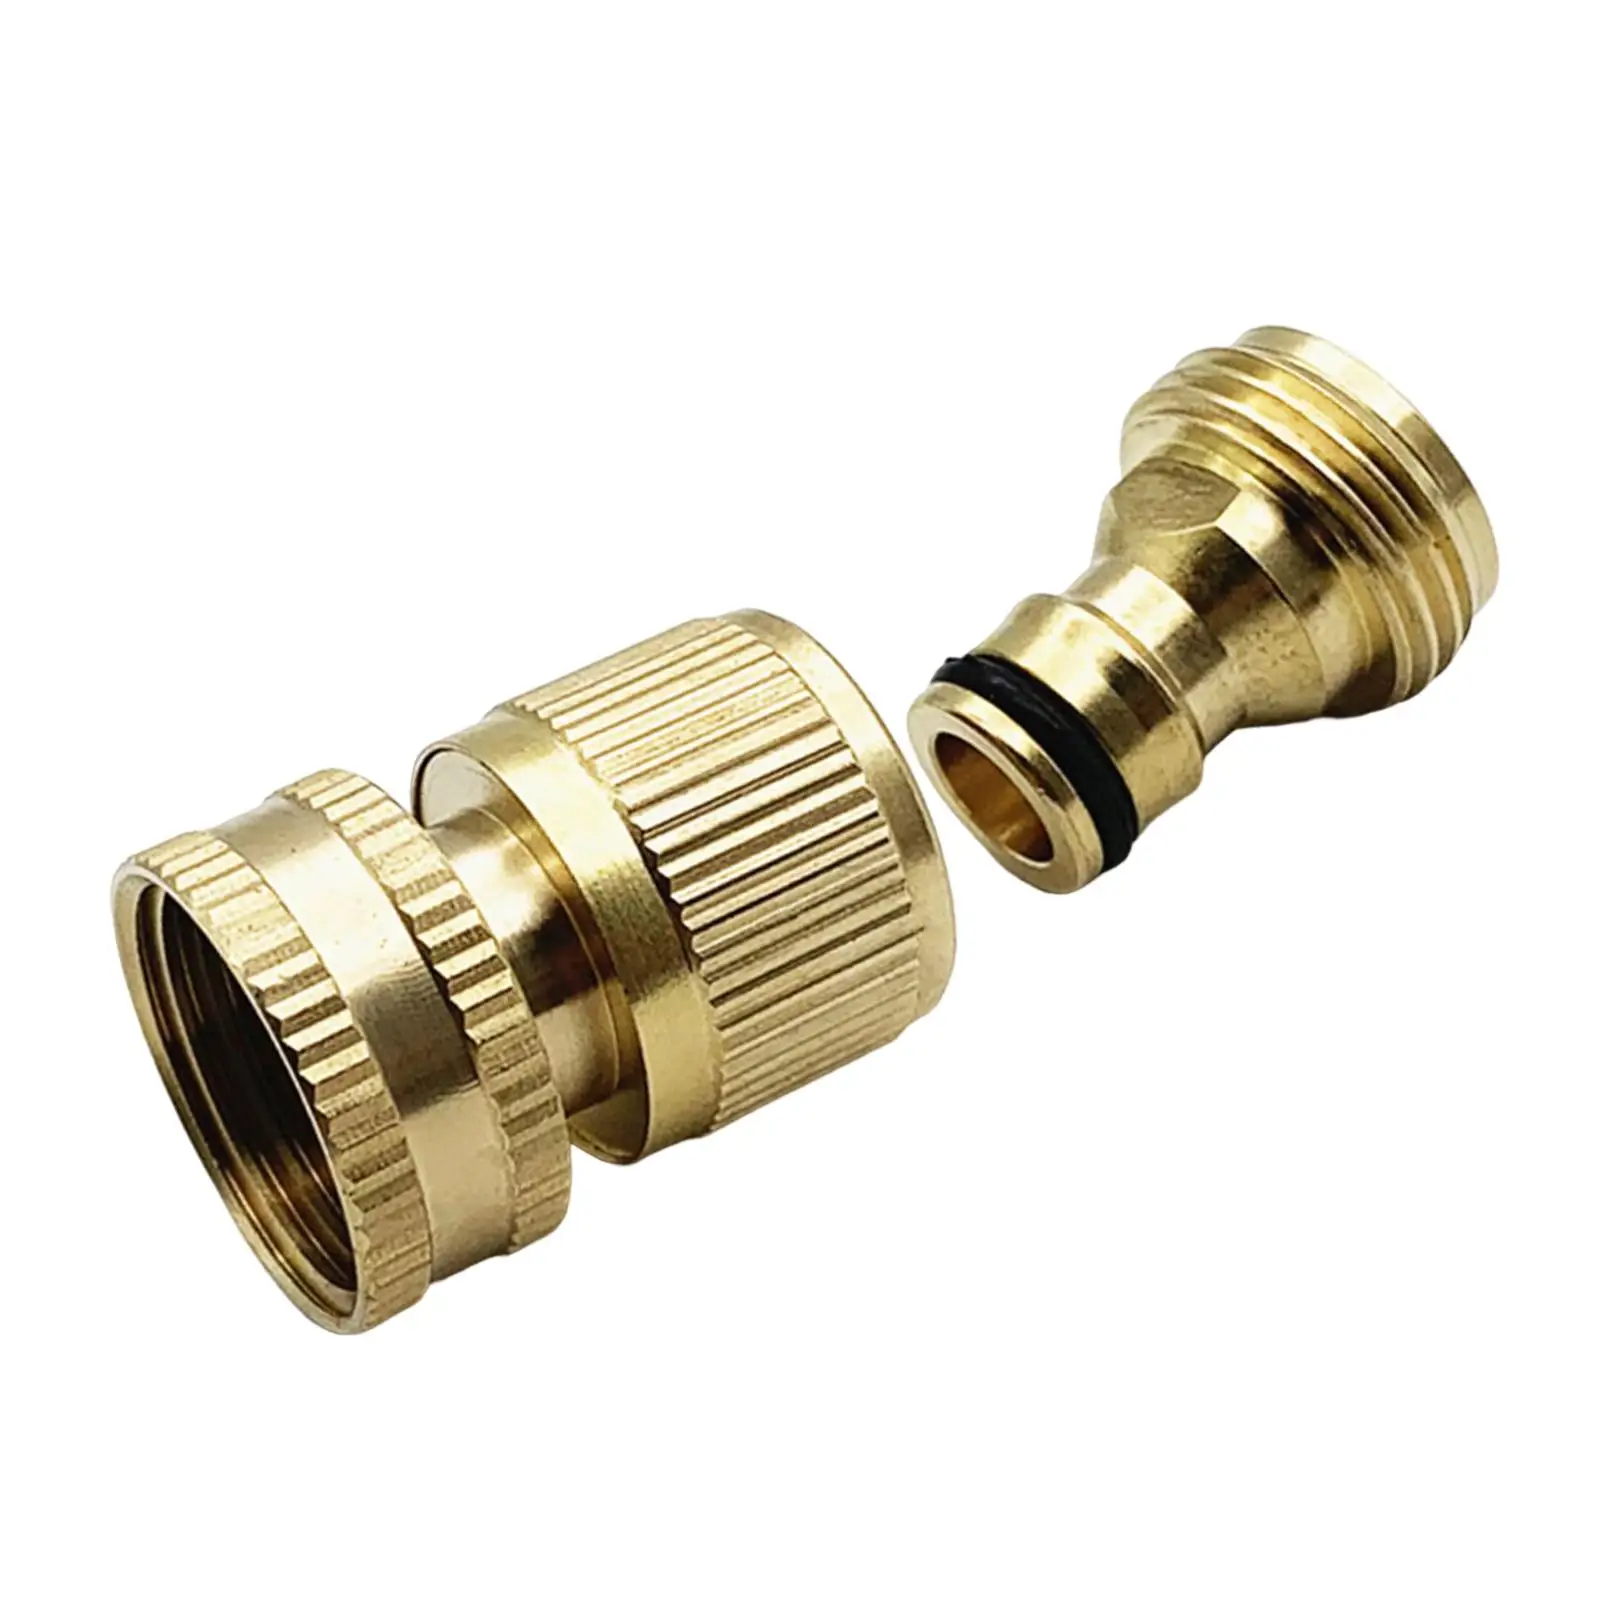 Water Garden Hose Connector 3/4 inch Water Hose Fittings for Pressure Washer